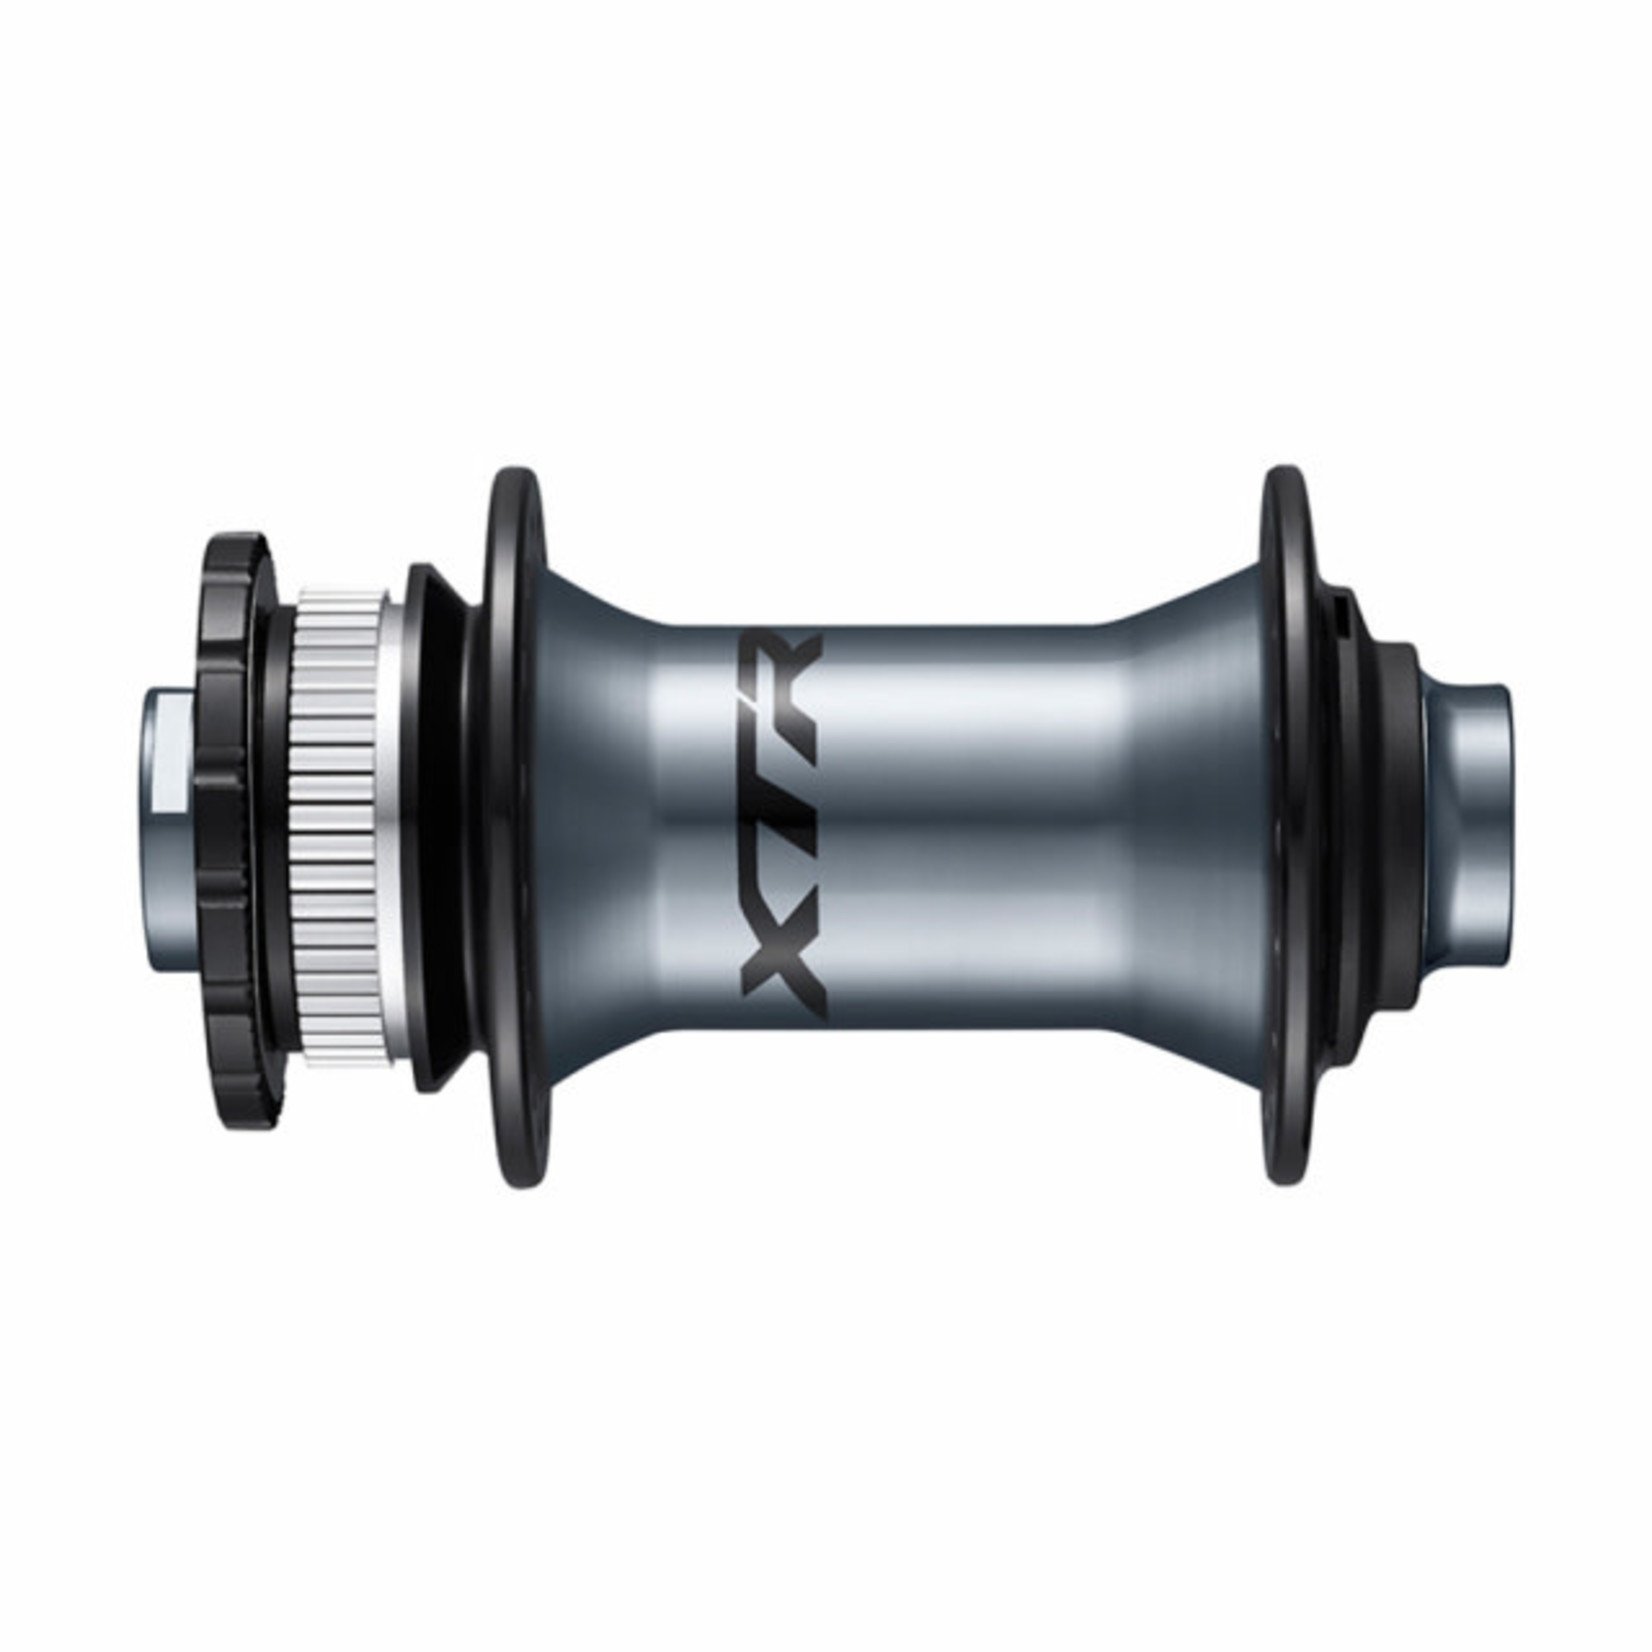 Shimano FRONT HUB, HB-M9110-B, XTR, CENTER LOCKDISC 32H, FOR 15MM THRU TYPE AXLE(W/O AXLE), OLD:110MM